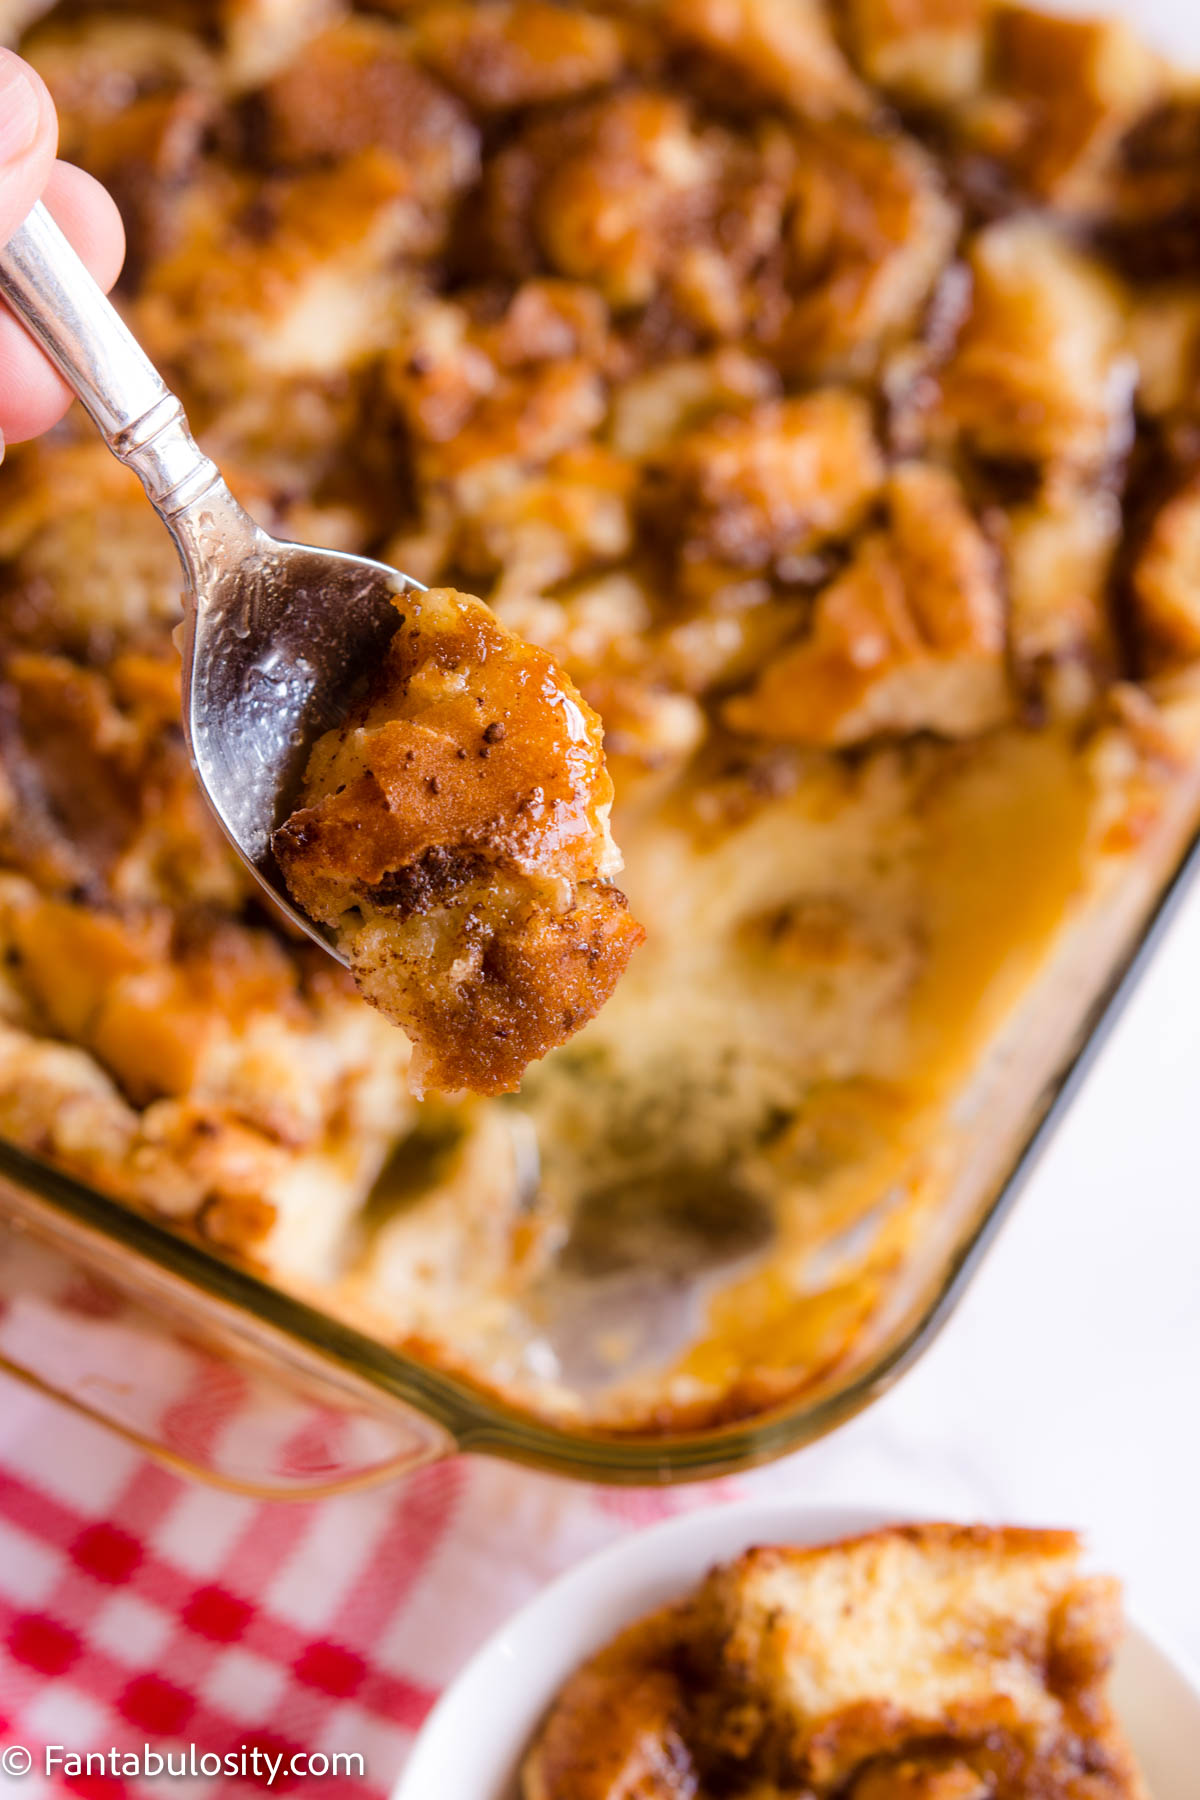 The BEST Bread Pudding Recipe - Old Fashioned Recipe (With Video!)